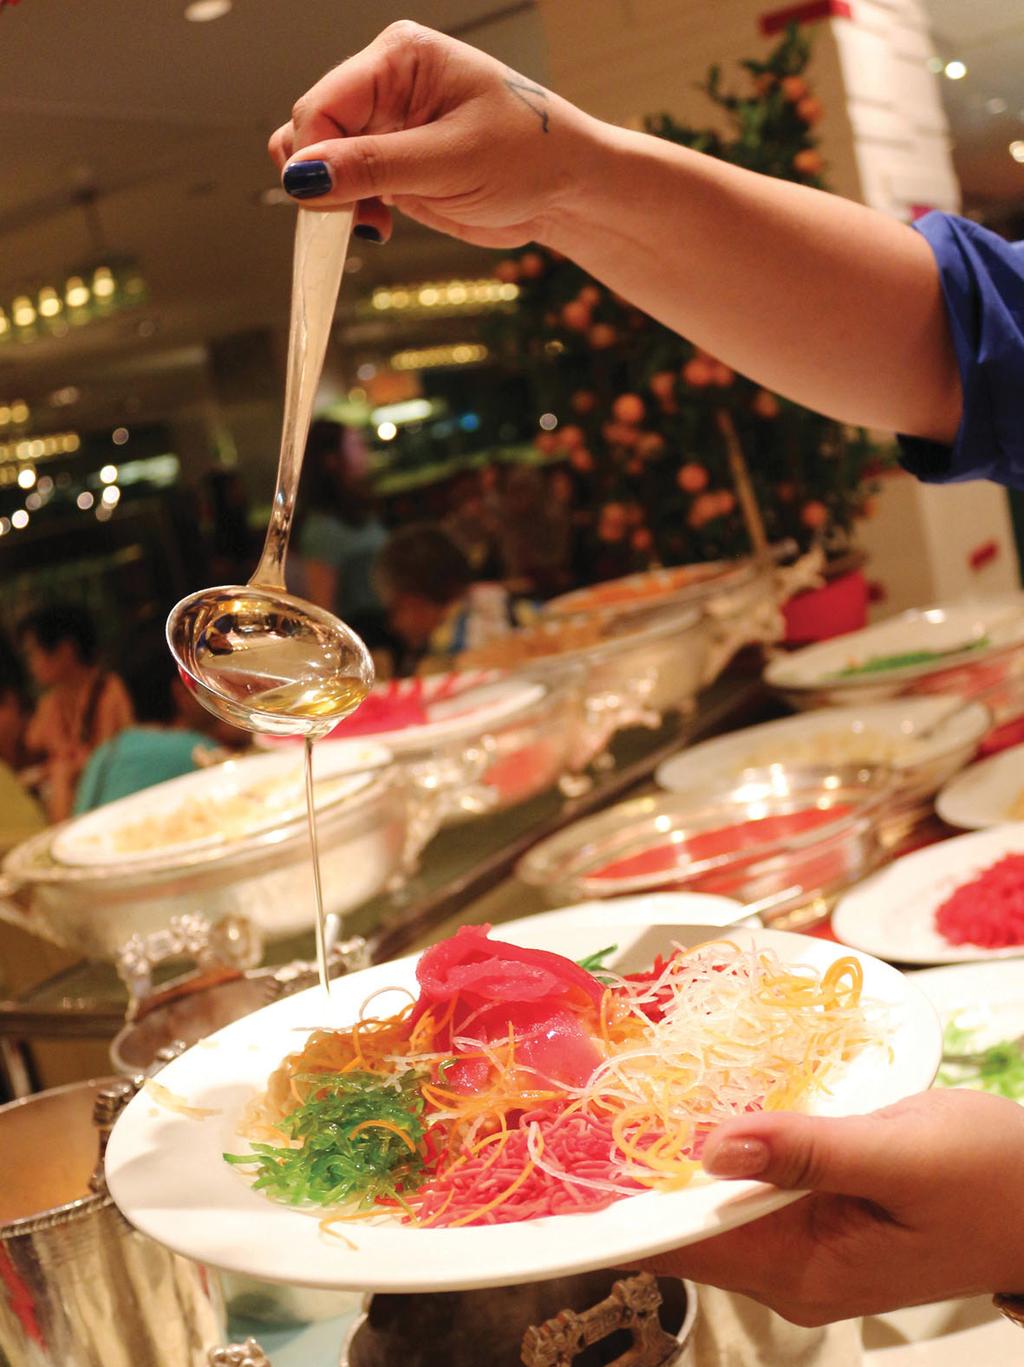 BOUNTIFUL LUNAR BUFFET 2 January till 19 February Have a memorable family reunion at Lemon Garden and enjoy a bountiful buffet spread, all freshly prepared a la minute with signature Yee Sang